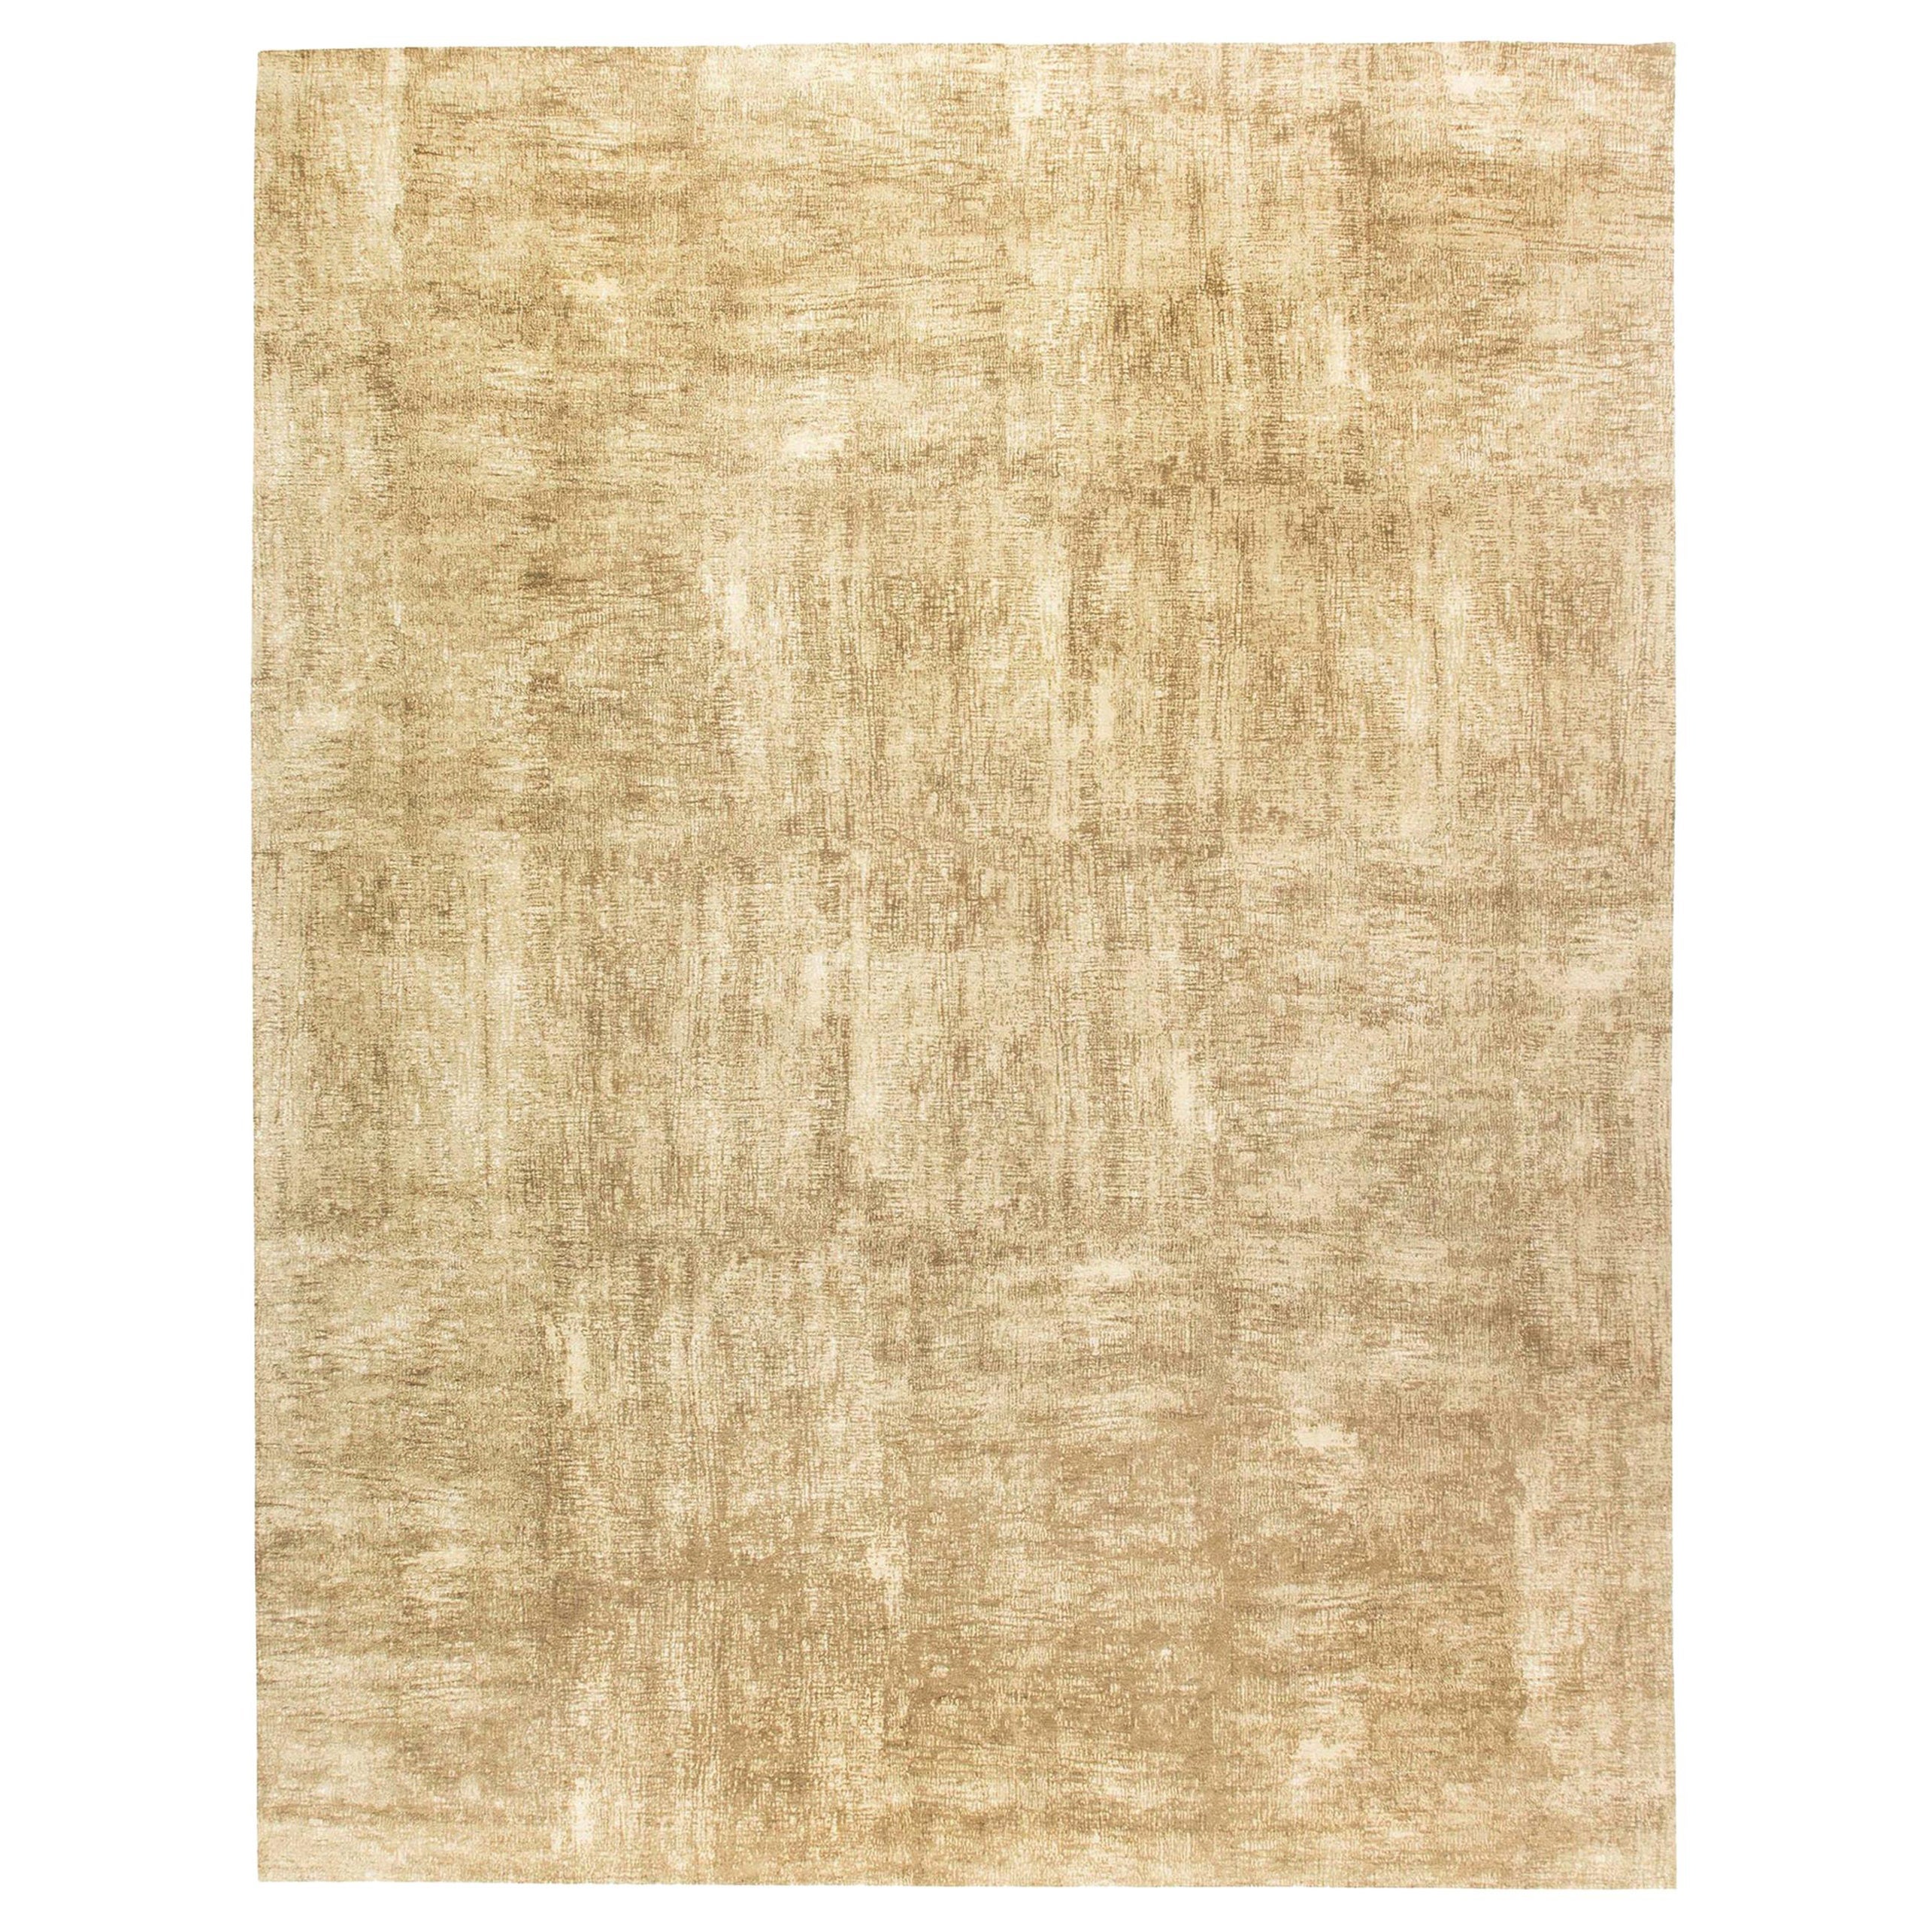 Contemporary Gold, Beige, Handmade Wool and Silk Rug by Doris Leslie Blau For Sale